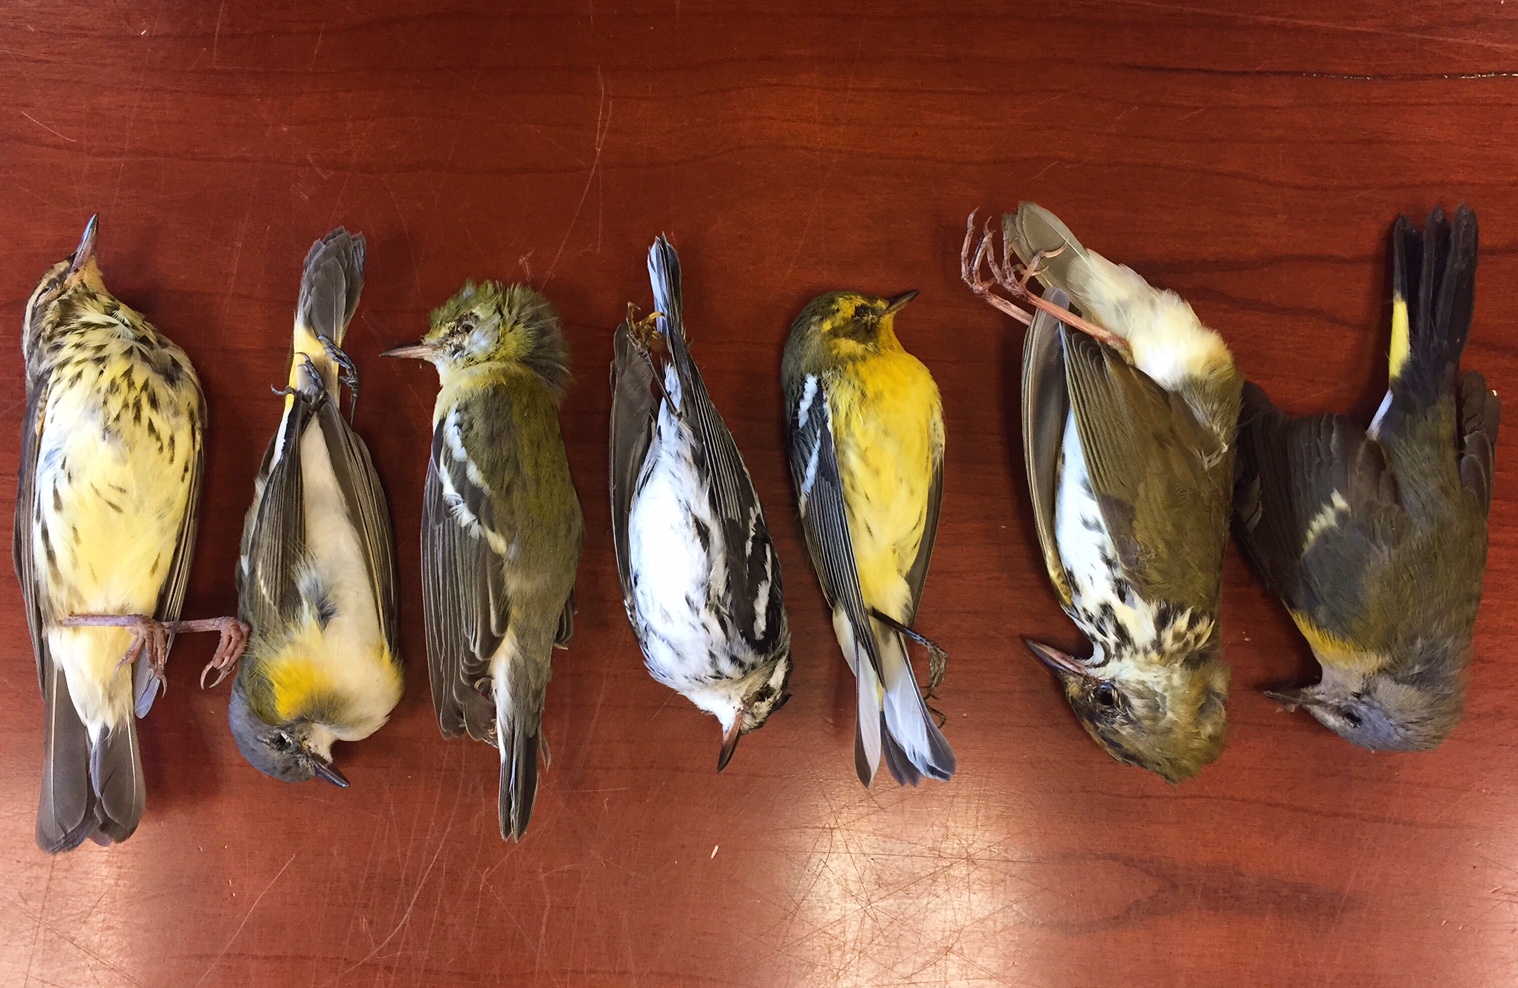 7  dead birds of varying colors laid out on a wooden table